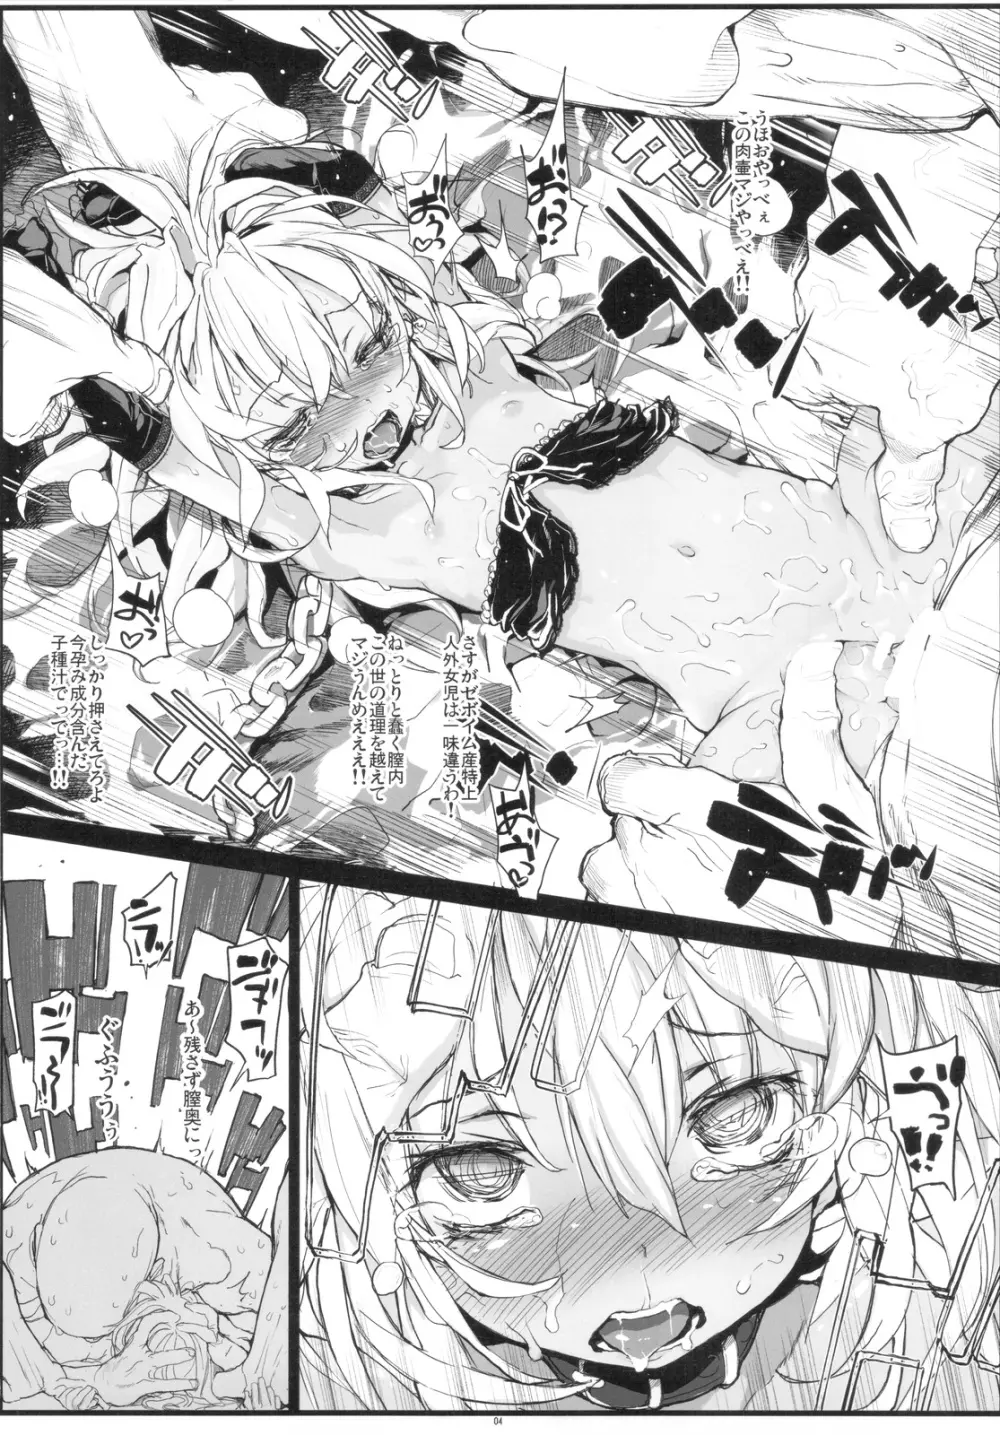 Xenogearsのエロいラクガキ本 Part4 Page.6